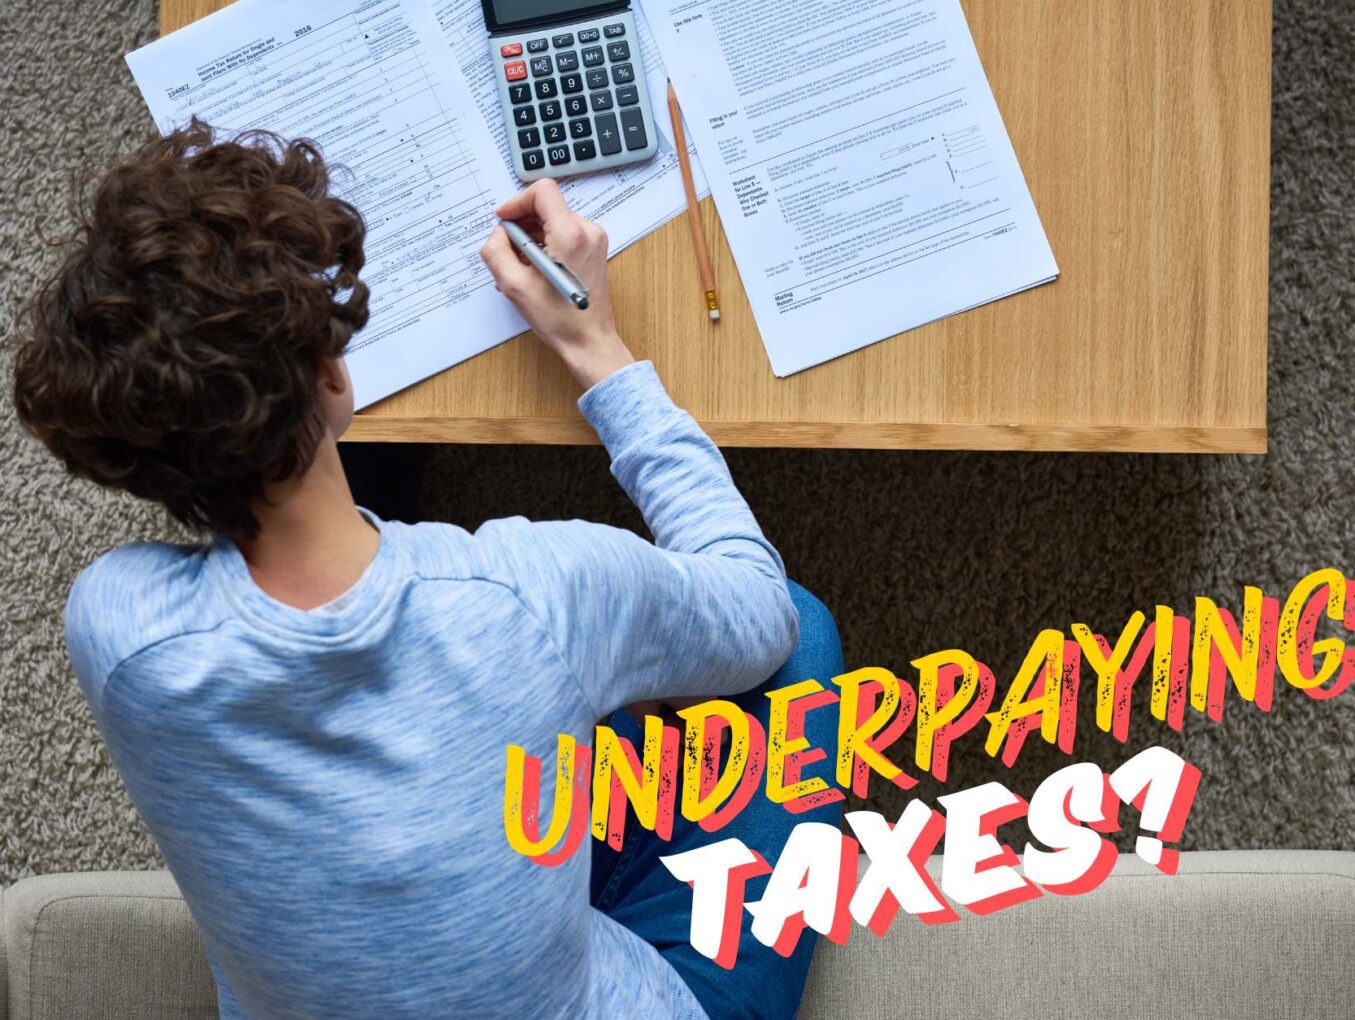 What Happens If You Underpay Taxes?